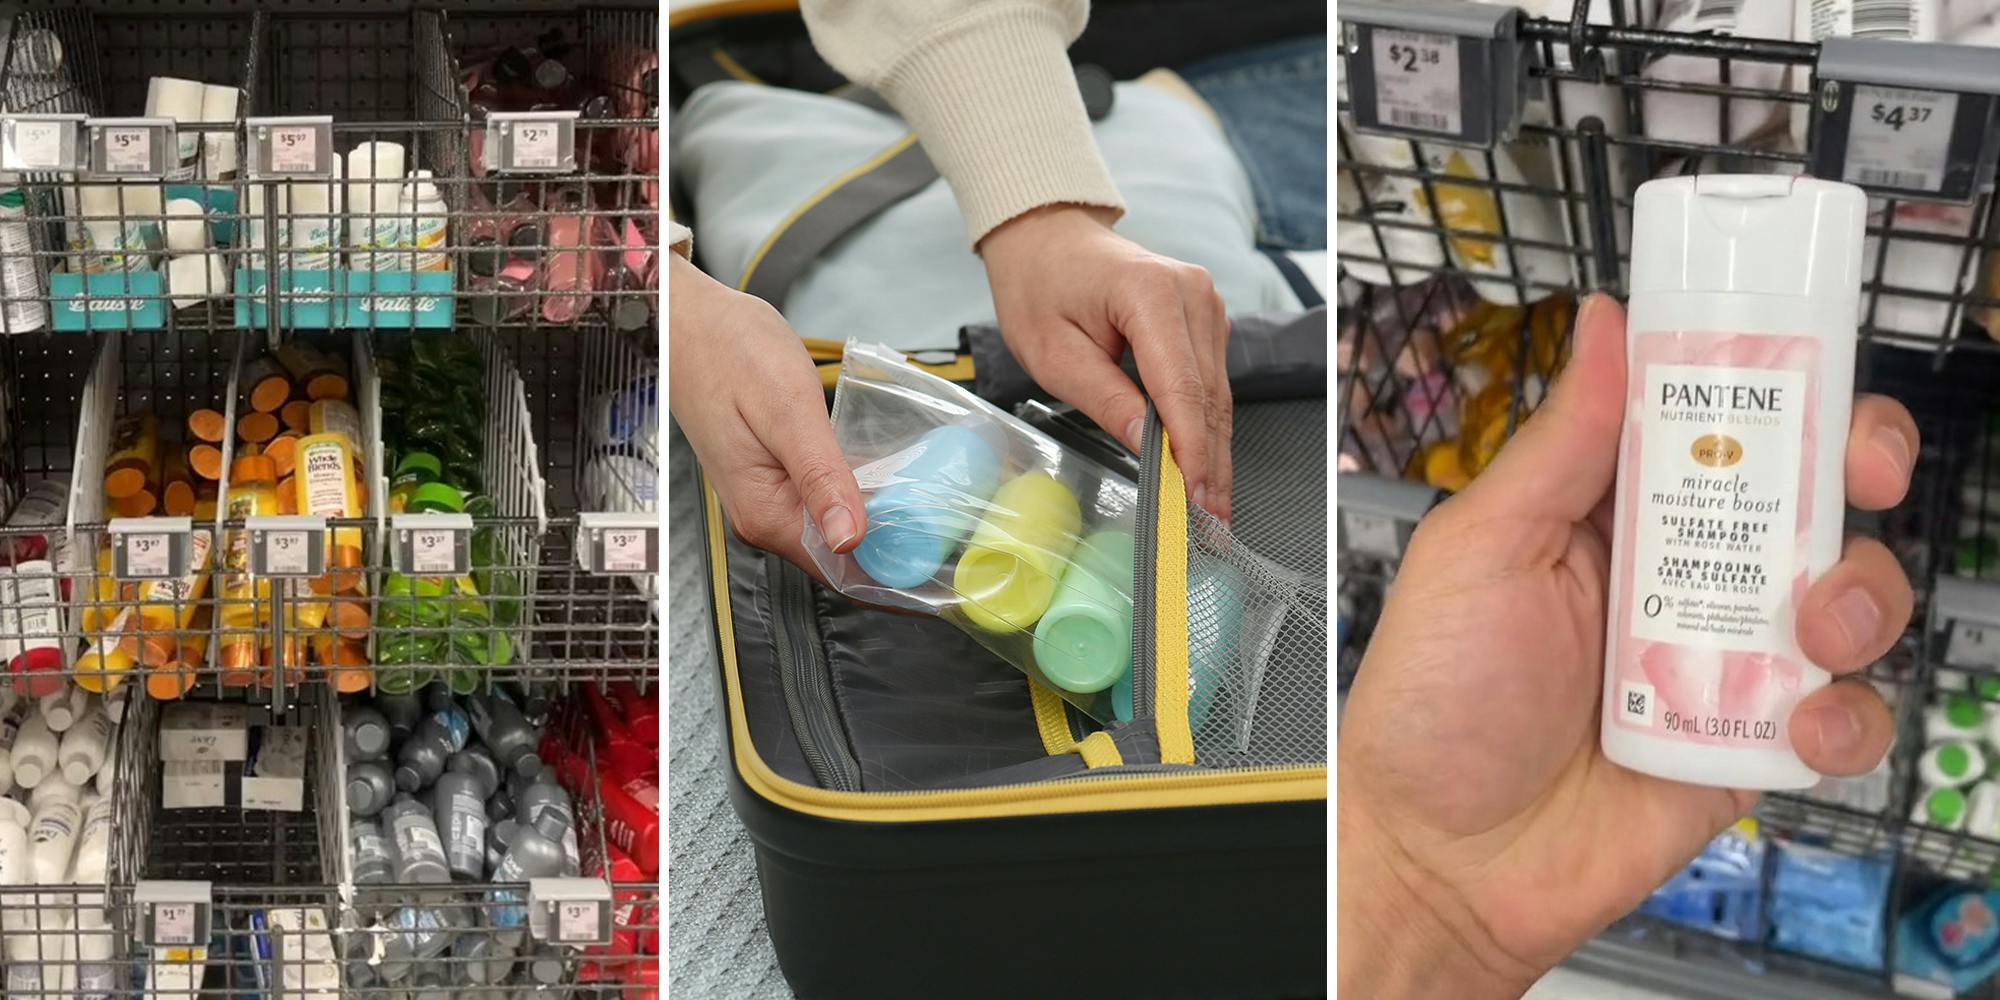 ‘I’m just learning this’: Shopper warns against being scammed by ‘travel-sized’ toiletries. He shares what to do instead